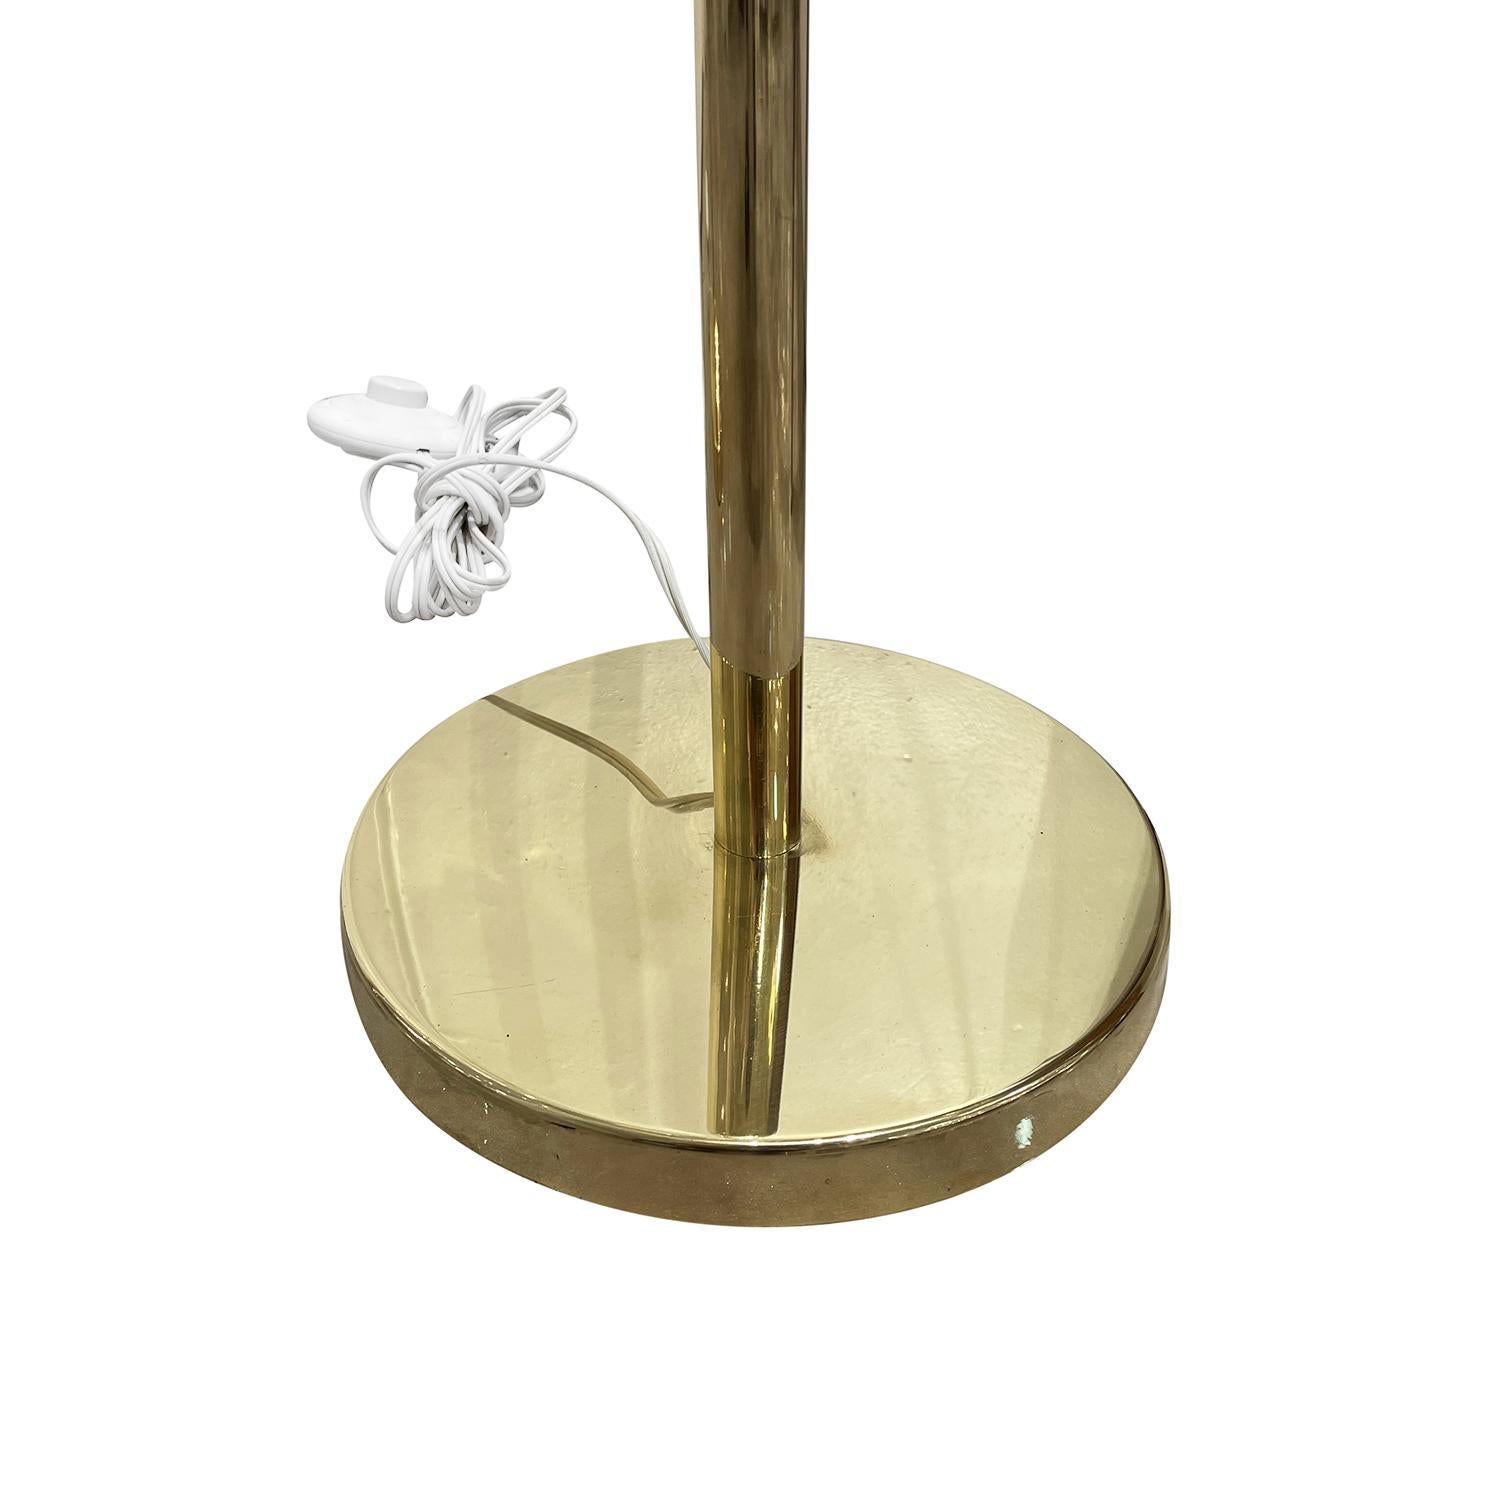 20th Century Swedish Pair of Markaryd Brass Floor Lamps by Hans-Agne Jakobsson For Sale 5